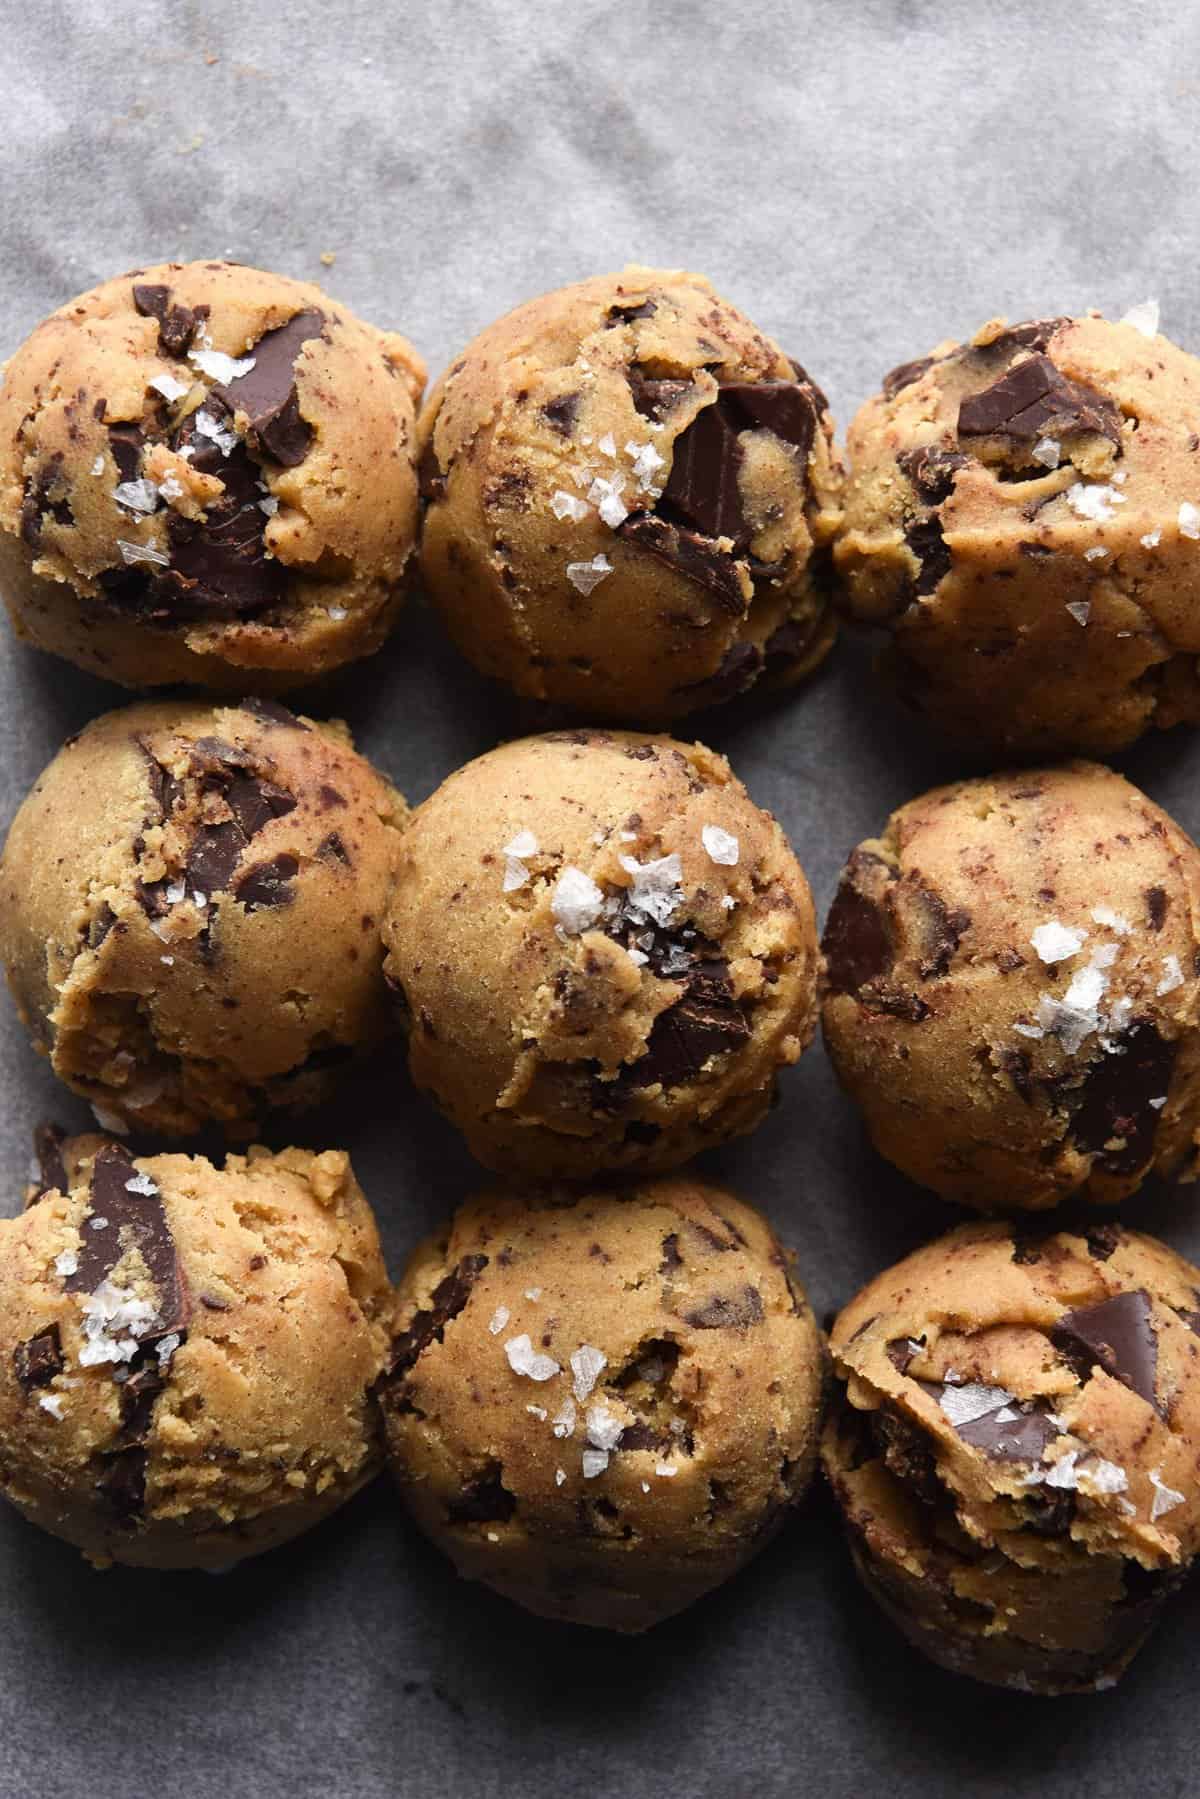 An aerial view of balls of uncooked gluten free choc chip cookie dough on a tray lined with baking paper. Some of the dough balls are sprinkled with salt